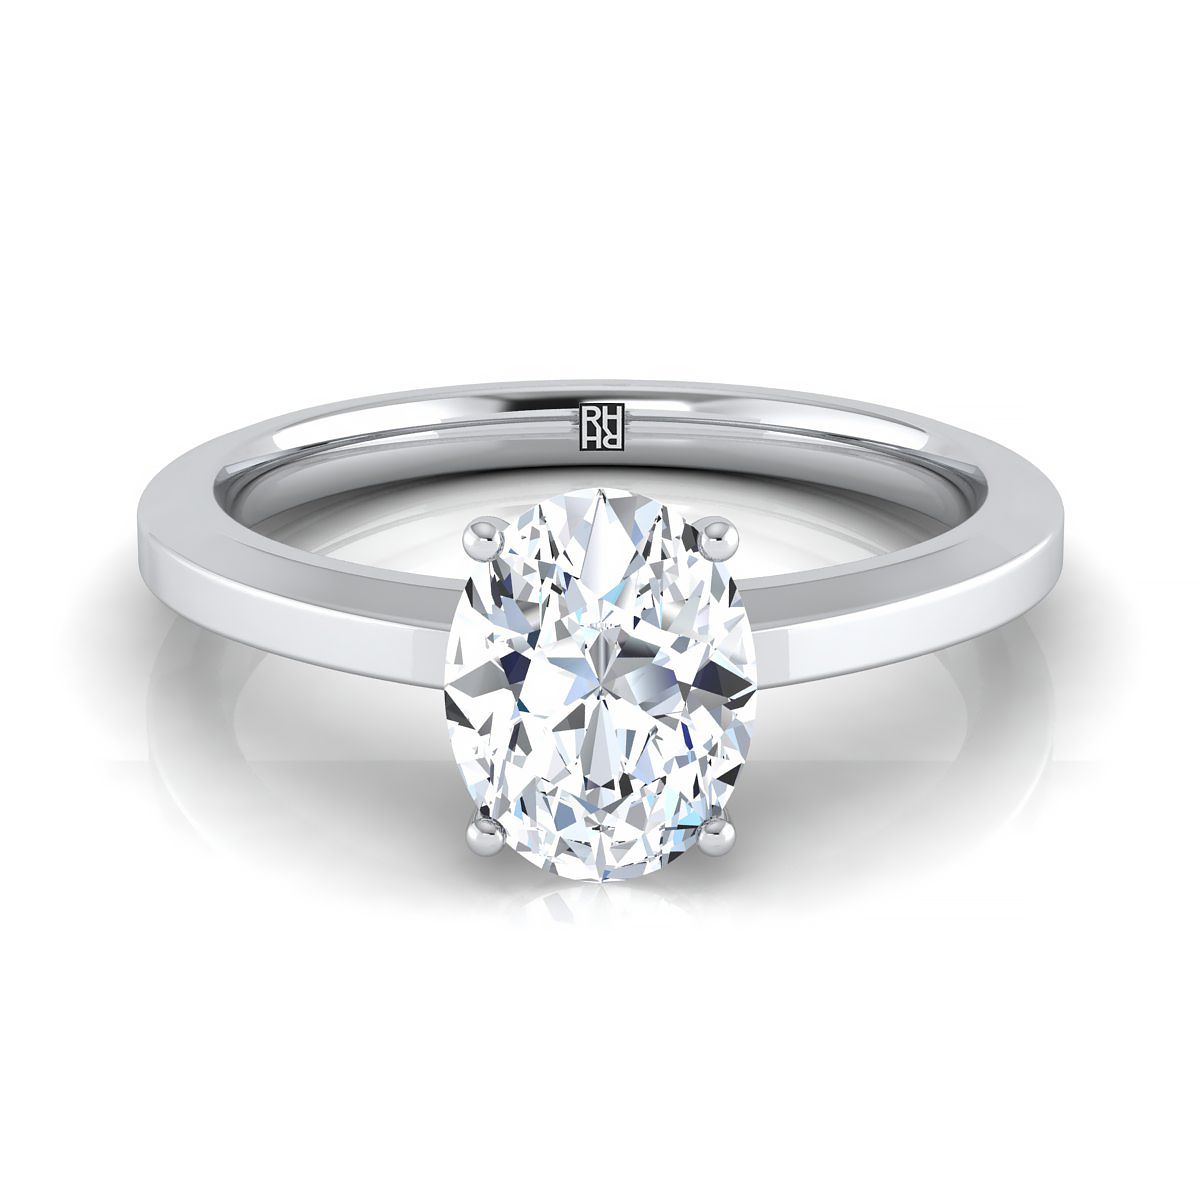 14K White Gold Oval  Beveled Edge Comfort Style Bright Finish Solitaire Engagement Ring